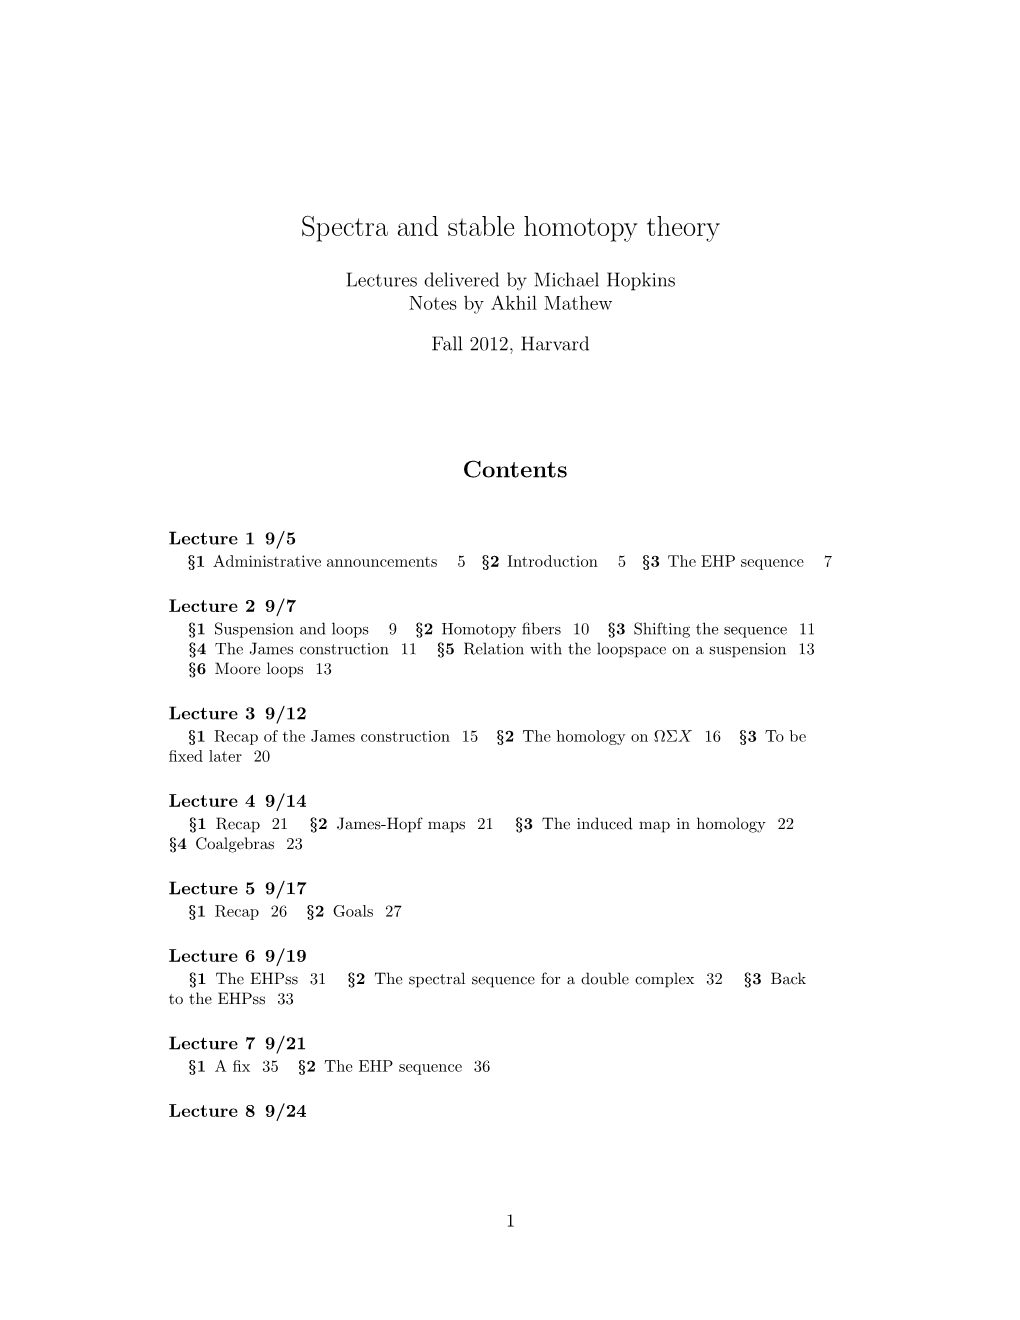 Spectra and Stable Homotopy Theory